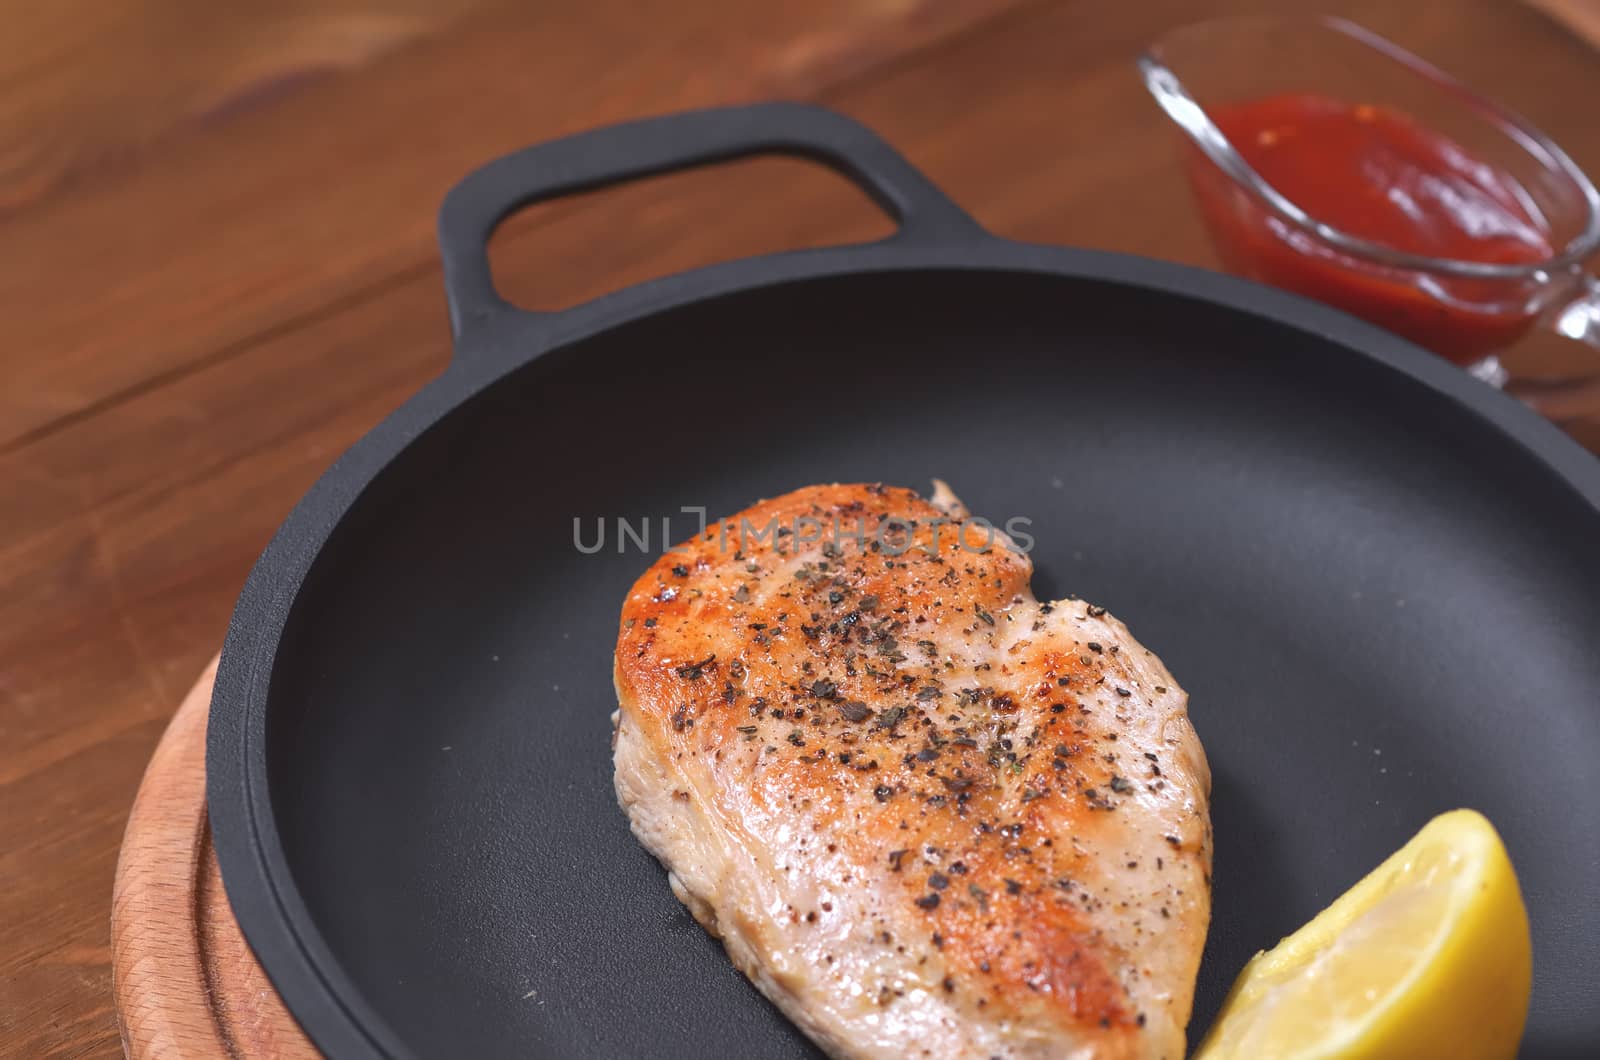 On a new frying pan, chicken fillet, fried with spices, lemon and sauce